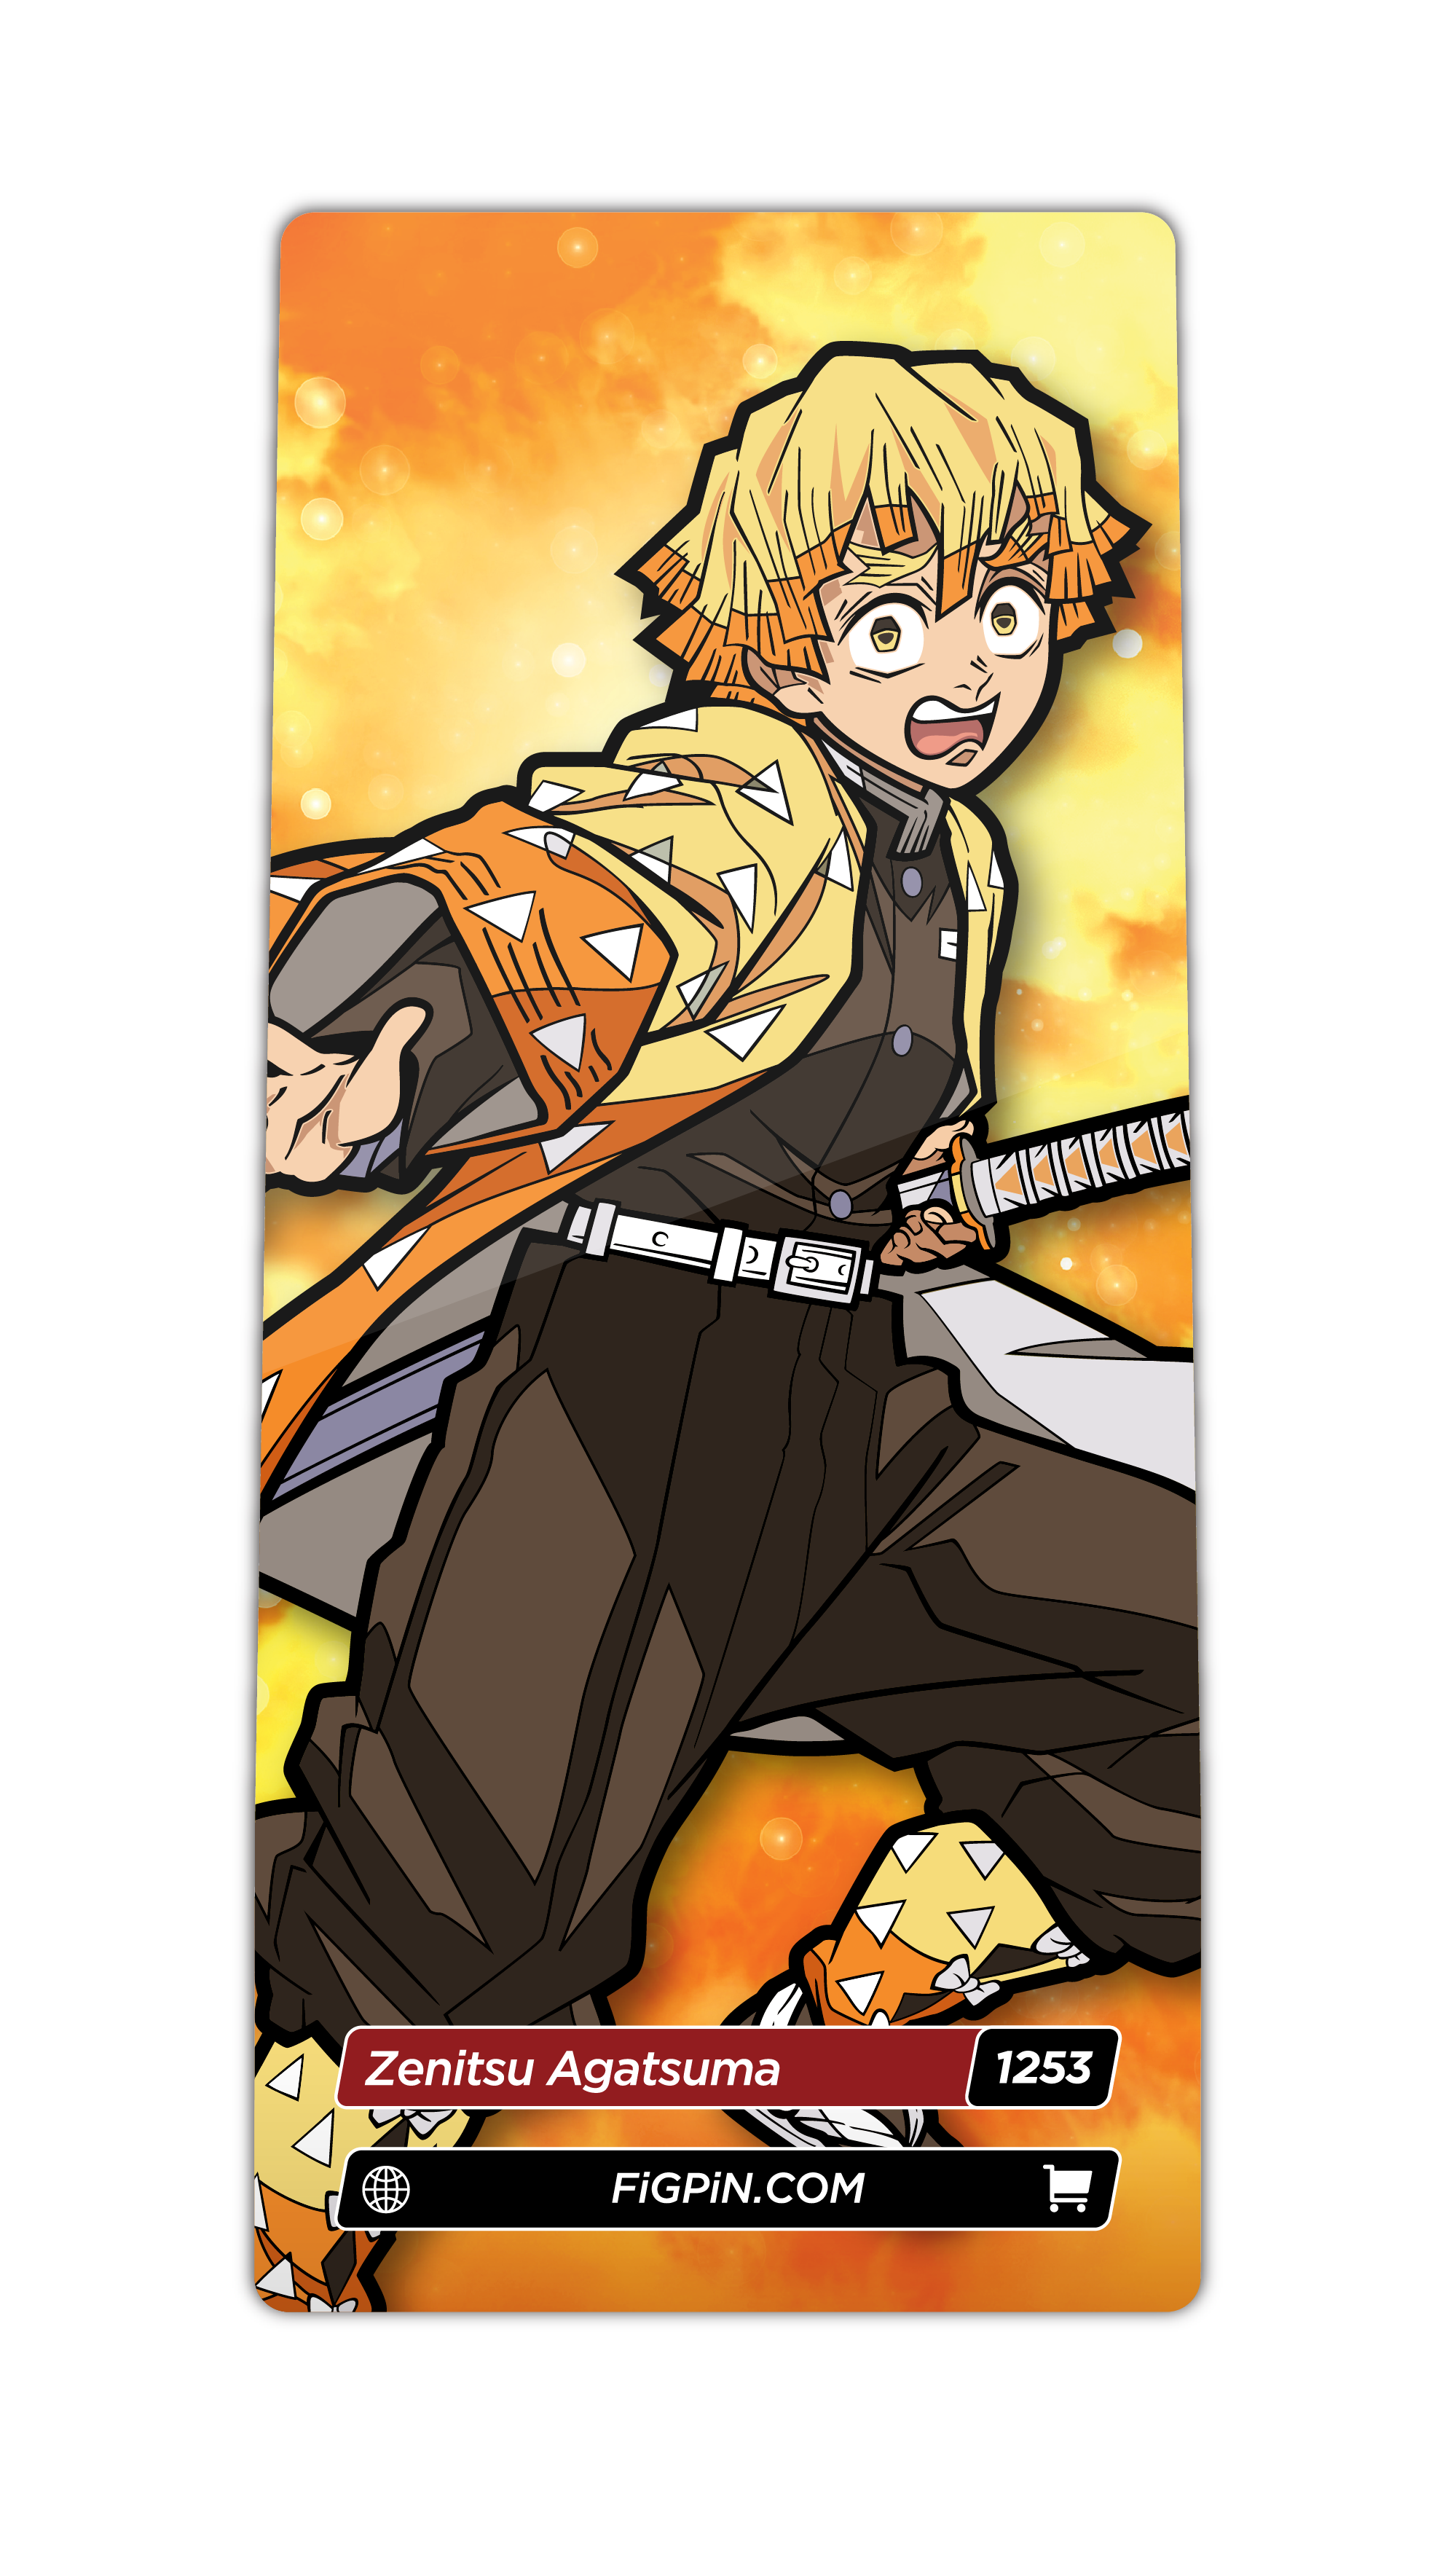 Character card of Demon Slayer's Zenitsu Agatsuma with text “Zenitsu Agatsuma (1253)” and link to FiGPiN’s website